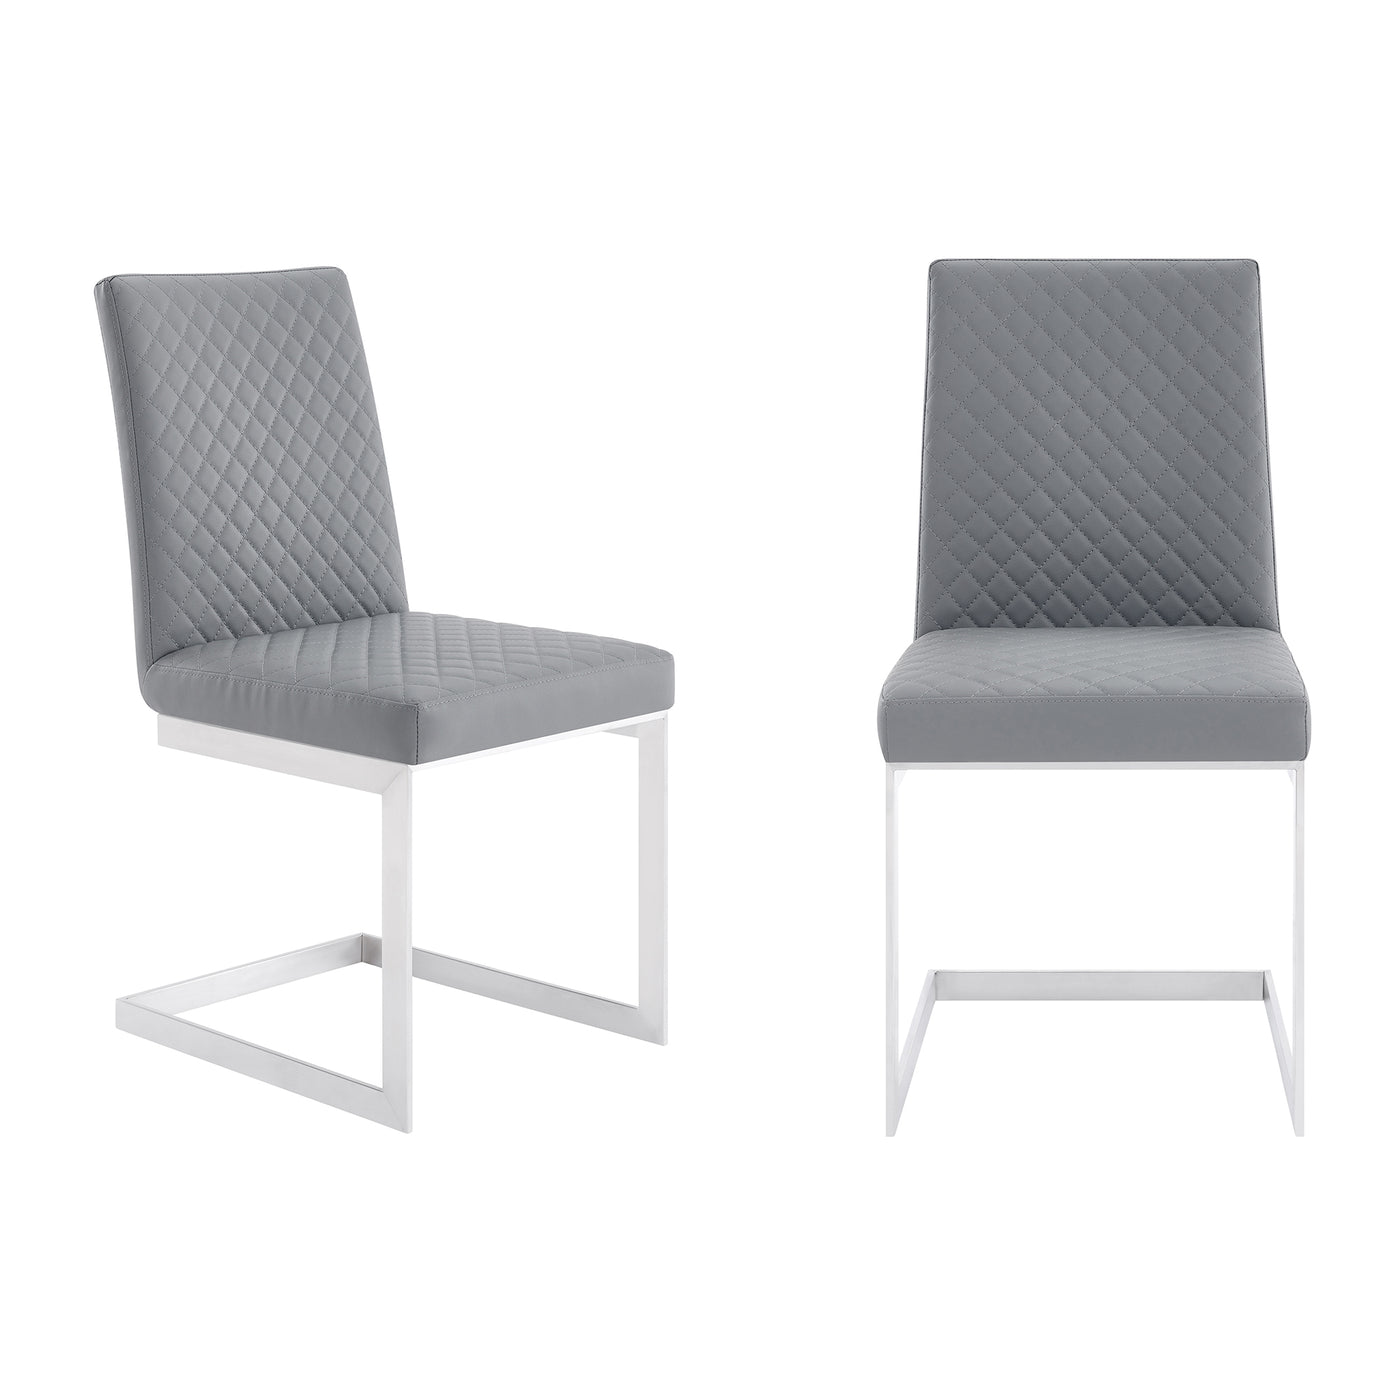 Copen Dining Chair Set of 2